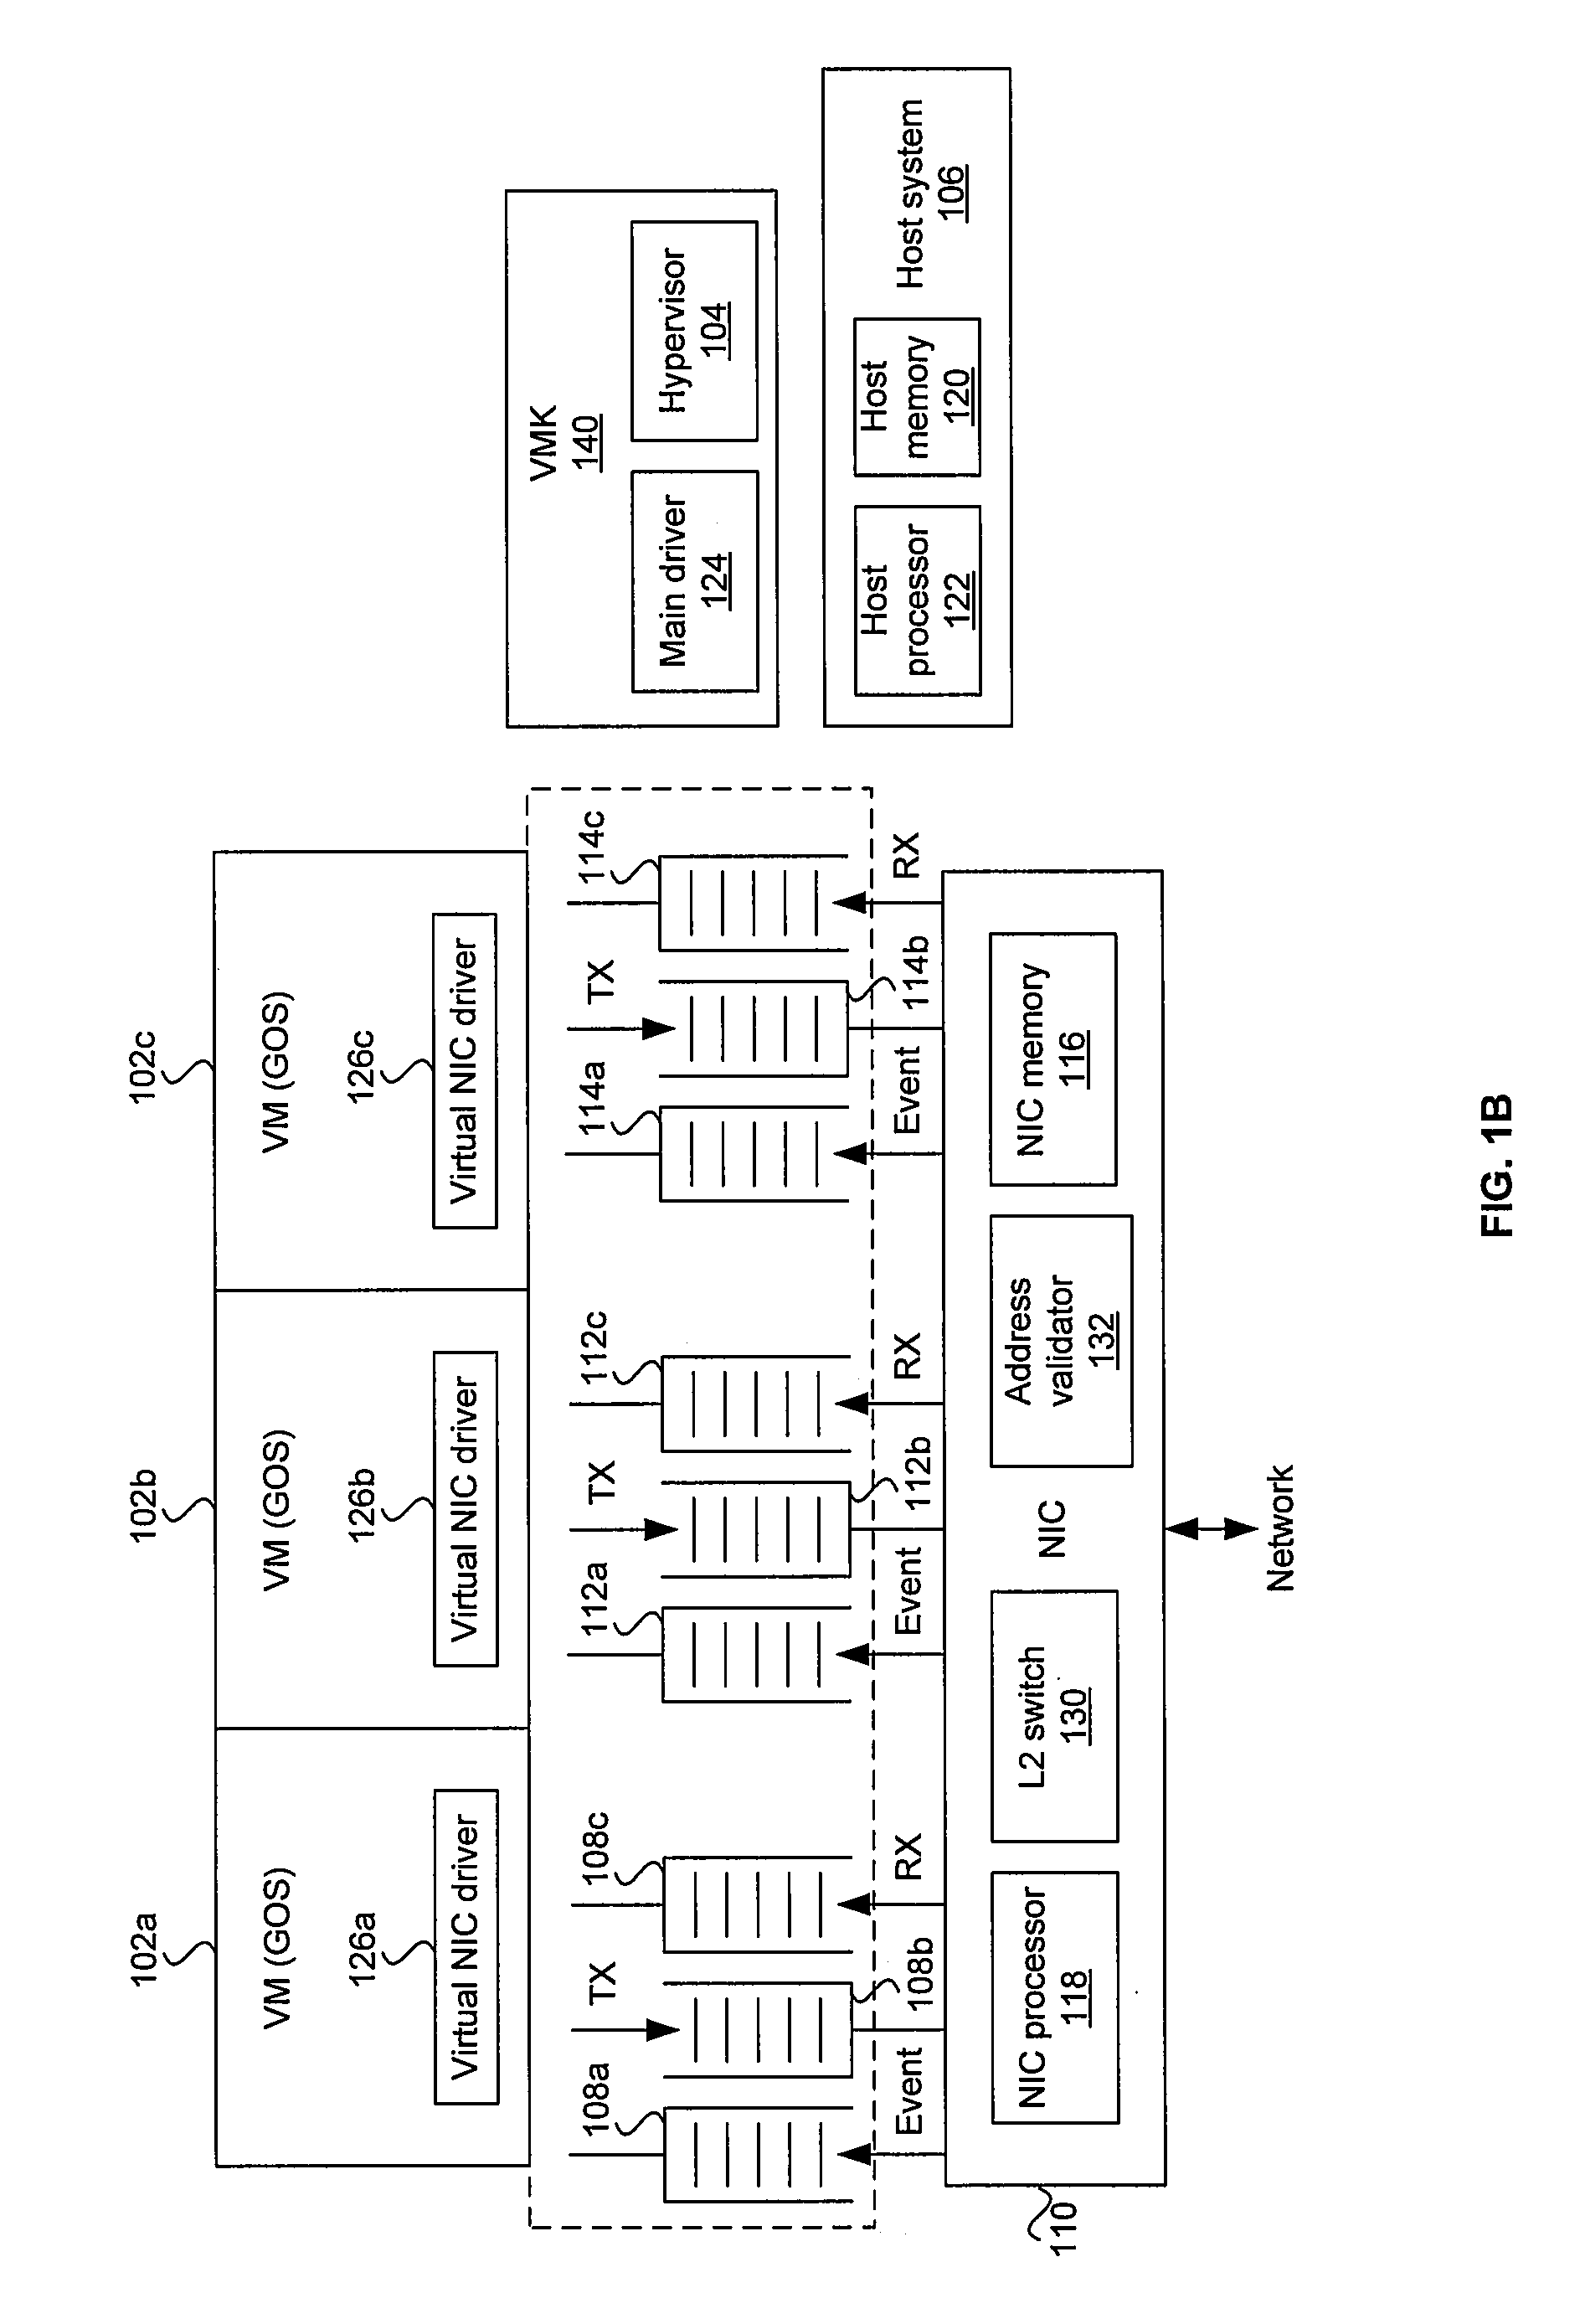 Method and System for Zero Copy in a Virtualized Network Environment